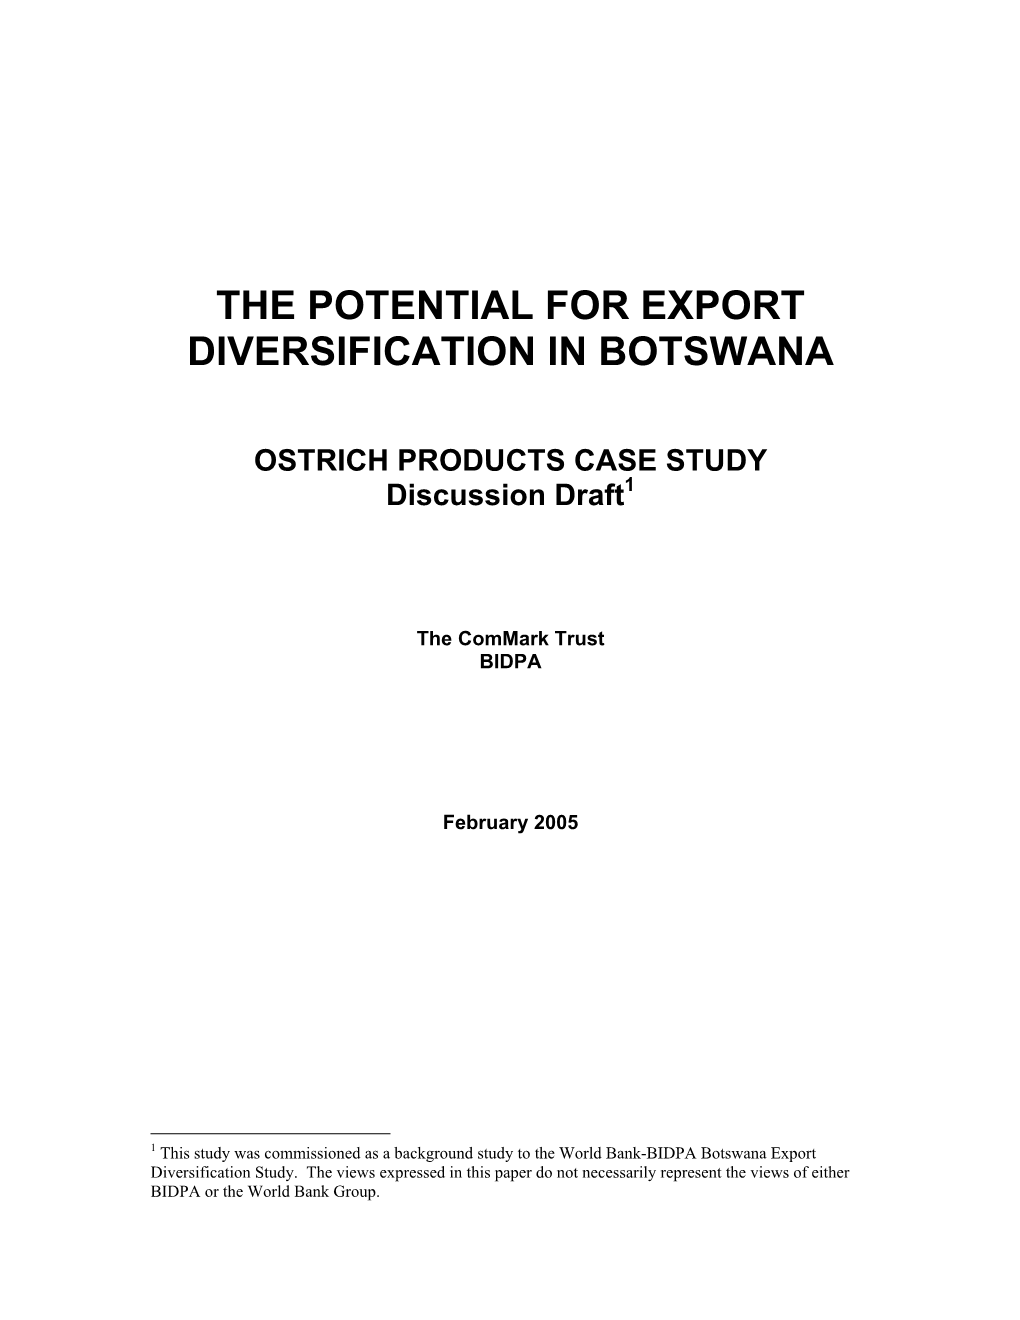 The Potential for Export Diversification in Botswana